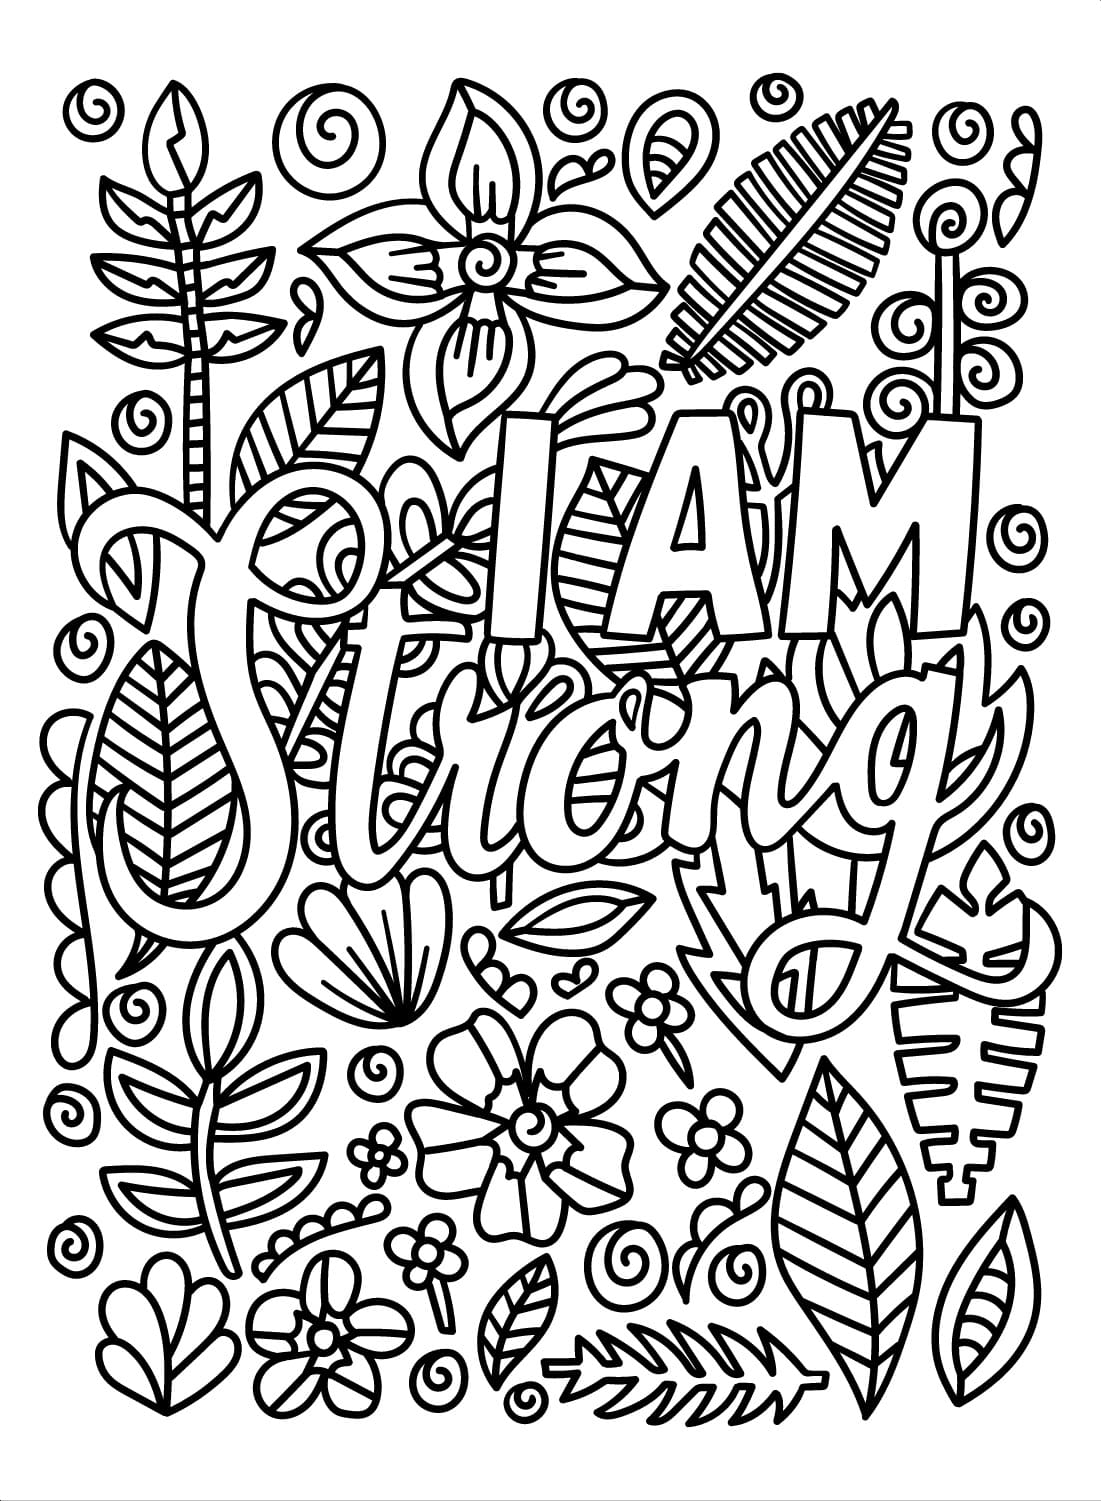 Inspirational - I Am Strong coloring page - Download, Print or Color ...